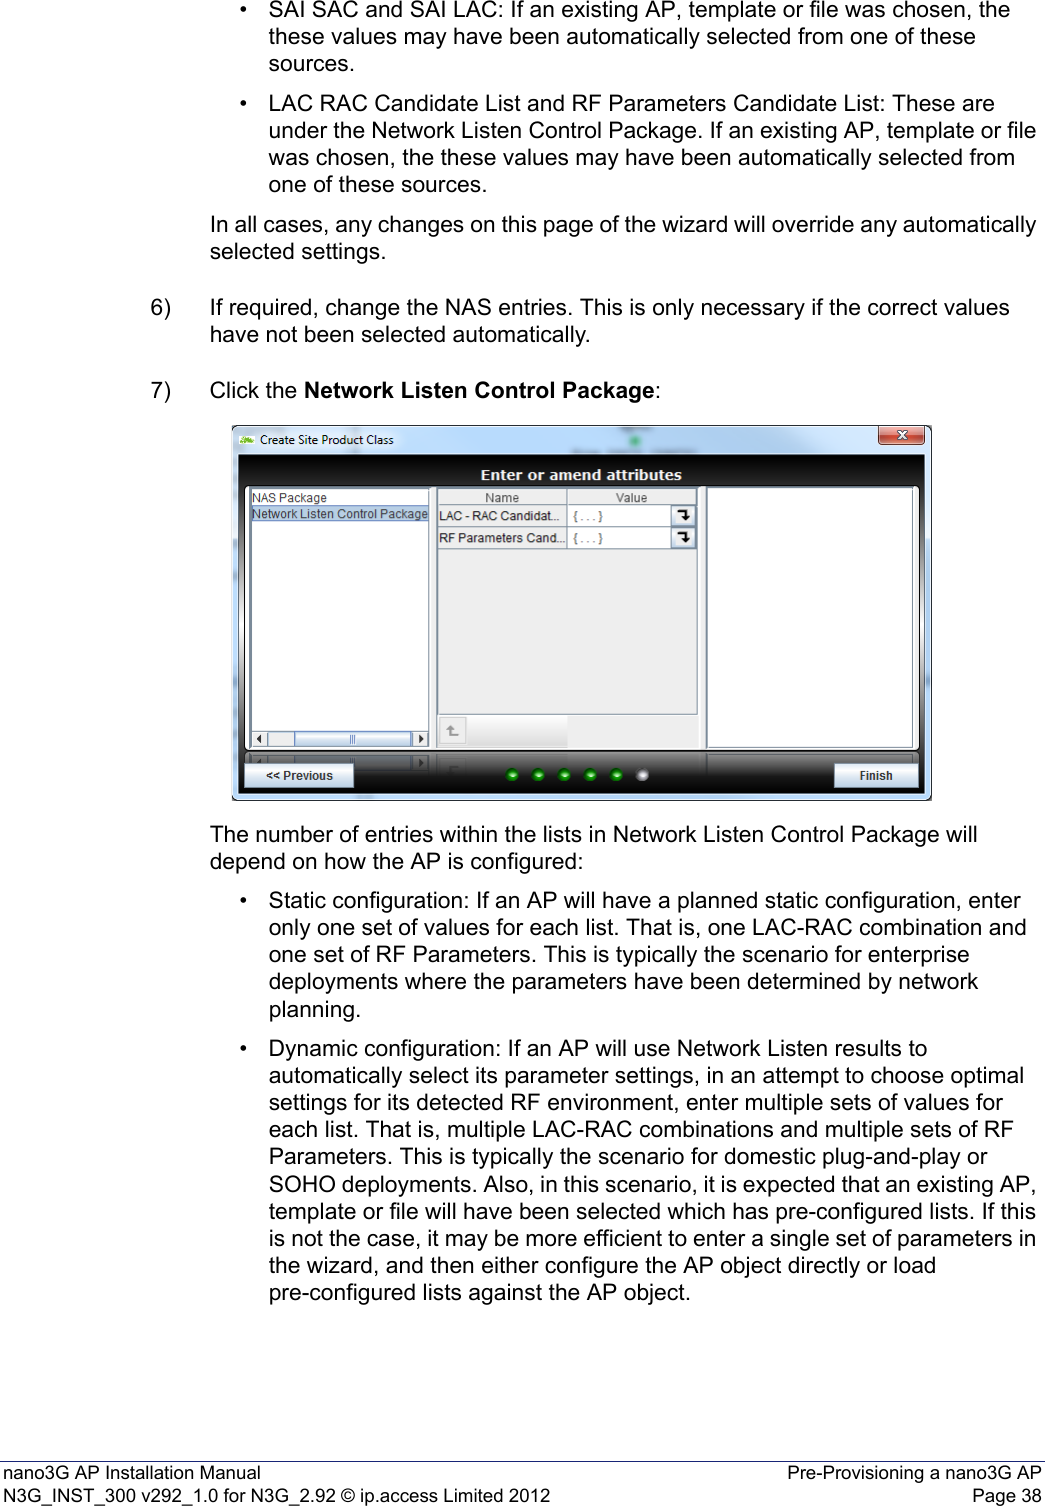 nano3G AP Installation Manual Pre-Provisioning a nano3G APN3G_INST_300 v292_1.0 for N3G_2.92 © ip.access Limited 2012 Page 38• SAI SAC and SAI LAC: If an existing AP, template or file was chosen, the these values may have been automatically selected from one of these sources.• LAC RAC Candidate List and RF Parameters Candidate List: These are under the Network Listen Control Package. If an existing AP, template or file was chosen, the these values may have been automatically selected from one of these sources. In all cases, any changes on this page of the wizard will override any automatically selected settings.6) If required, change the NAS entries. This is only necessary if the correct values have not been selected automatically. 7) Click the Network Listen Control Package:The number of entries within the lists in Network Listen Control Package will depend on how the AP is configured:• Static configuration: If an AP will have a planned static configuration, enter only one set of values for each list. That is, one LAC-RAC combination and one set of RF Parameters. This is typically the scenario for enterprise deployments where the parameters have been determined by network planning. • Dynamic configuration: If an AP will use Network Listen results to automatically select its parameter settings, in an attempt to choose optimal settings for its detected RF environment, enter multiple sets of values for each list. That is, multiple LAC-RAC combinations and multiple sets of RF Parameters. This is typically the scenario for domestic plug-and-play or SOHO deployments. Also, in this scenario, it is expected that an existing AP, template or file will have been selected which has pre-configured lists. If this is not the case, it may be more efficient to enter a single set of parameters in the wizard, and then either configure the AP object directly or load pre-configured lists against the AP object. 